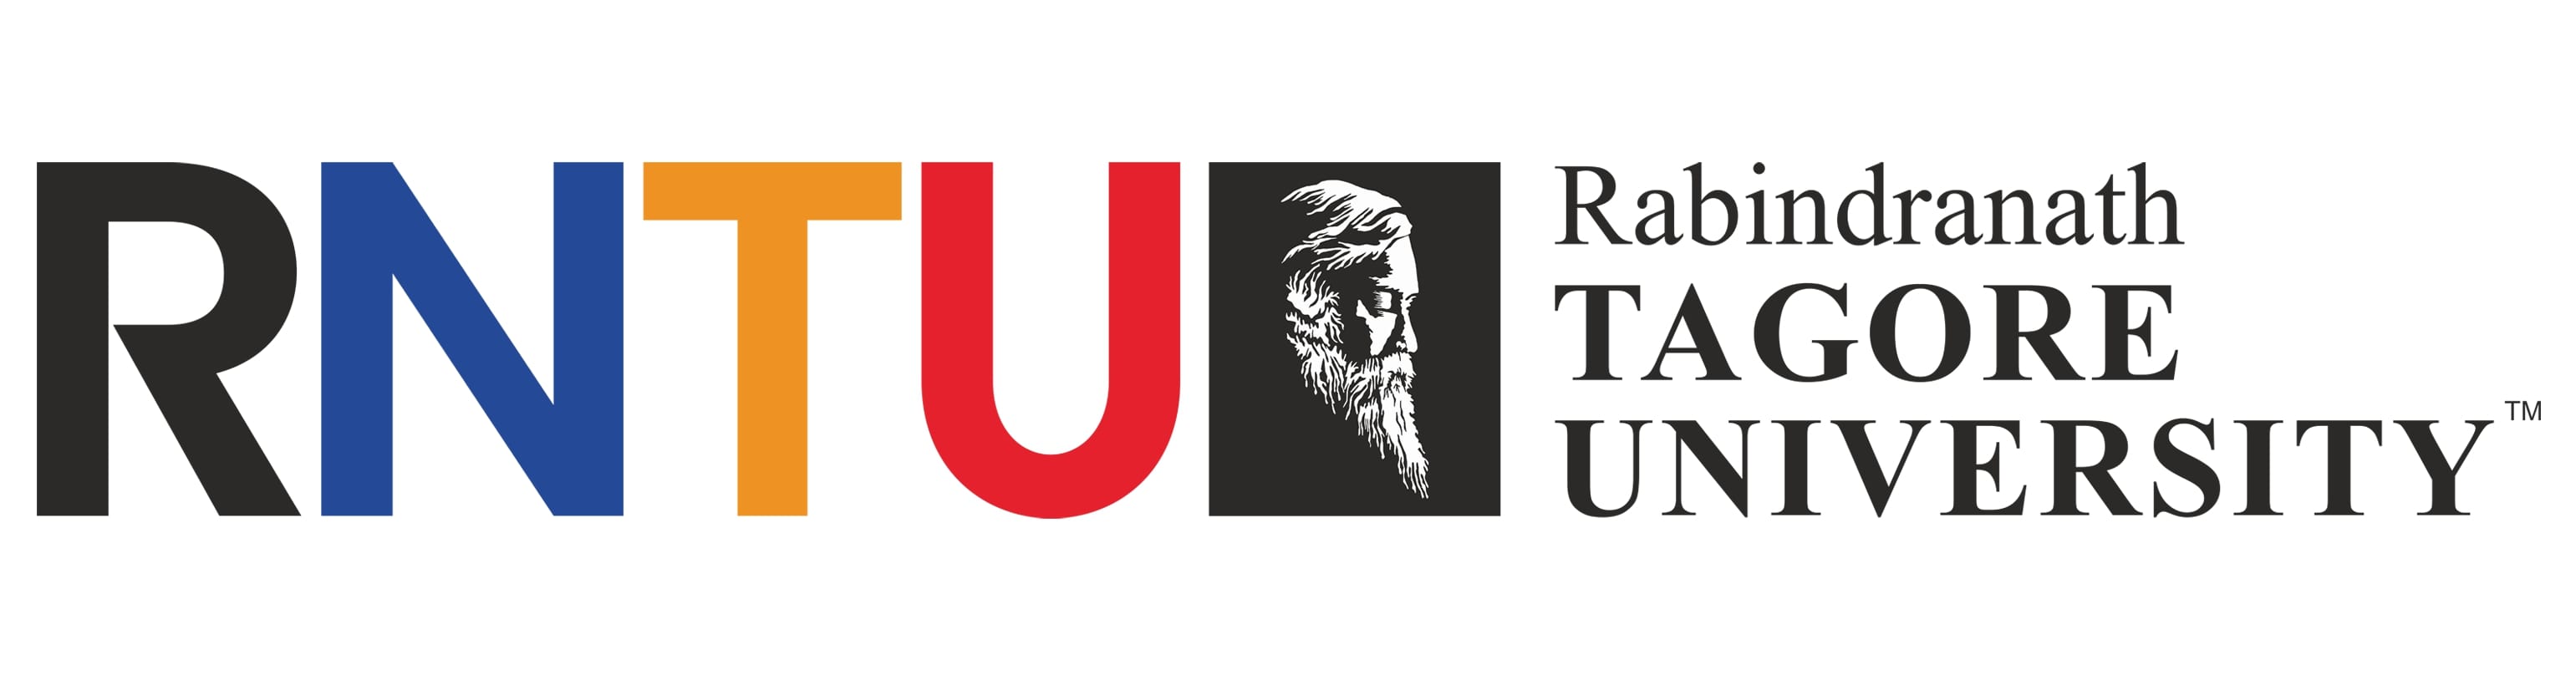 Rabindranath Tagore University Know All about the Indian UGC-Approved ...